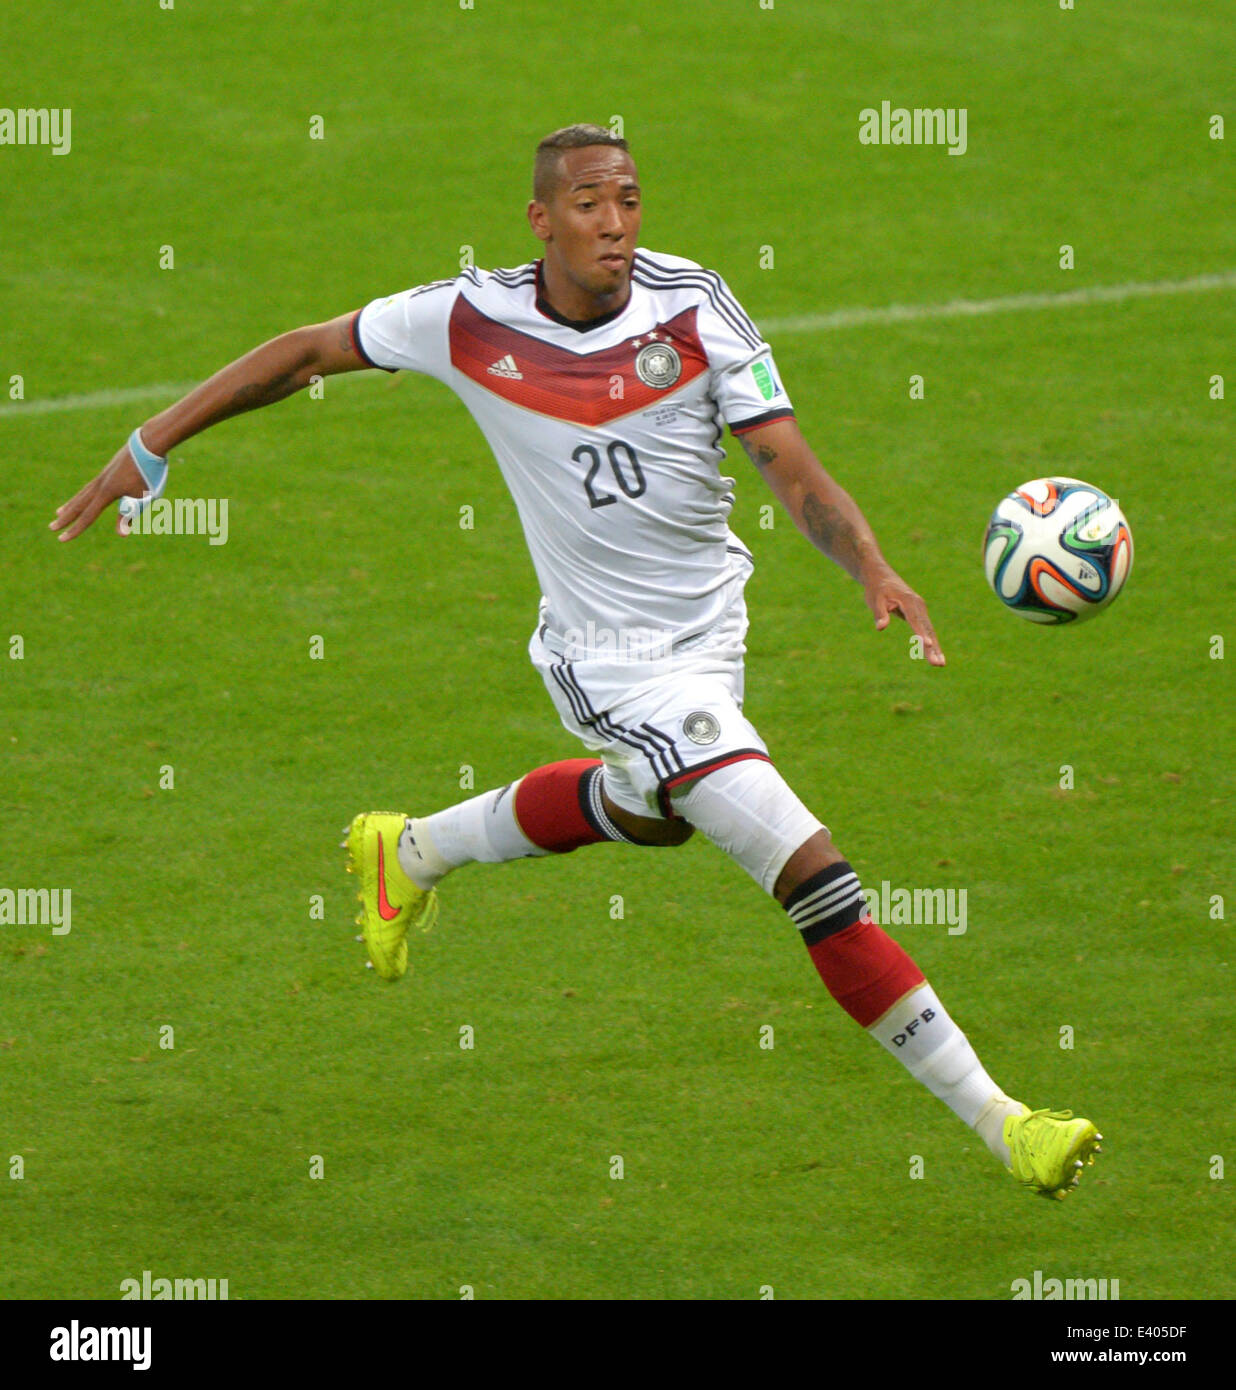 Porto Alegre, Brazil. 30th June, 2014. Germany's Jerome Boateng during the  FIFA World Cup 2014 round of sixteen match between Germany and Algeria at  the stadium Estadio Beira-Rio in Porto Alegre, Brazil,